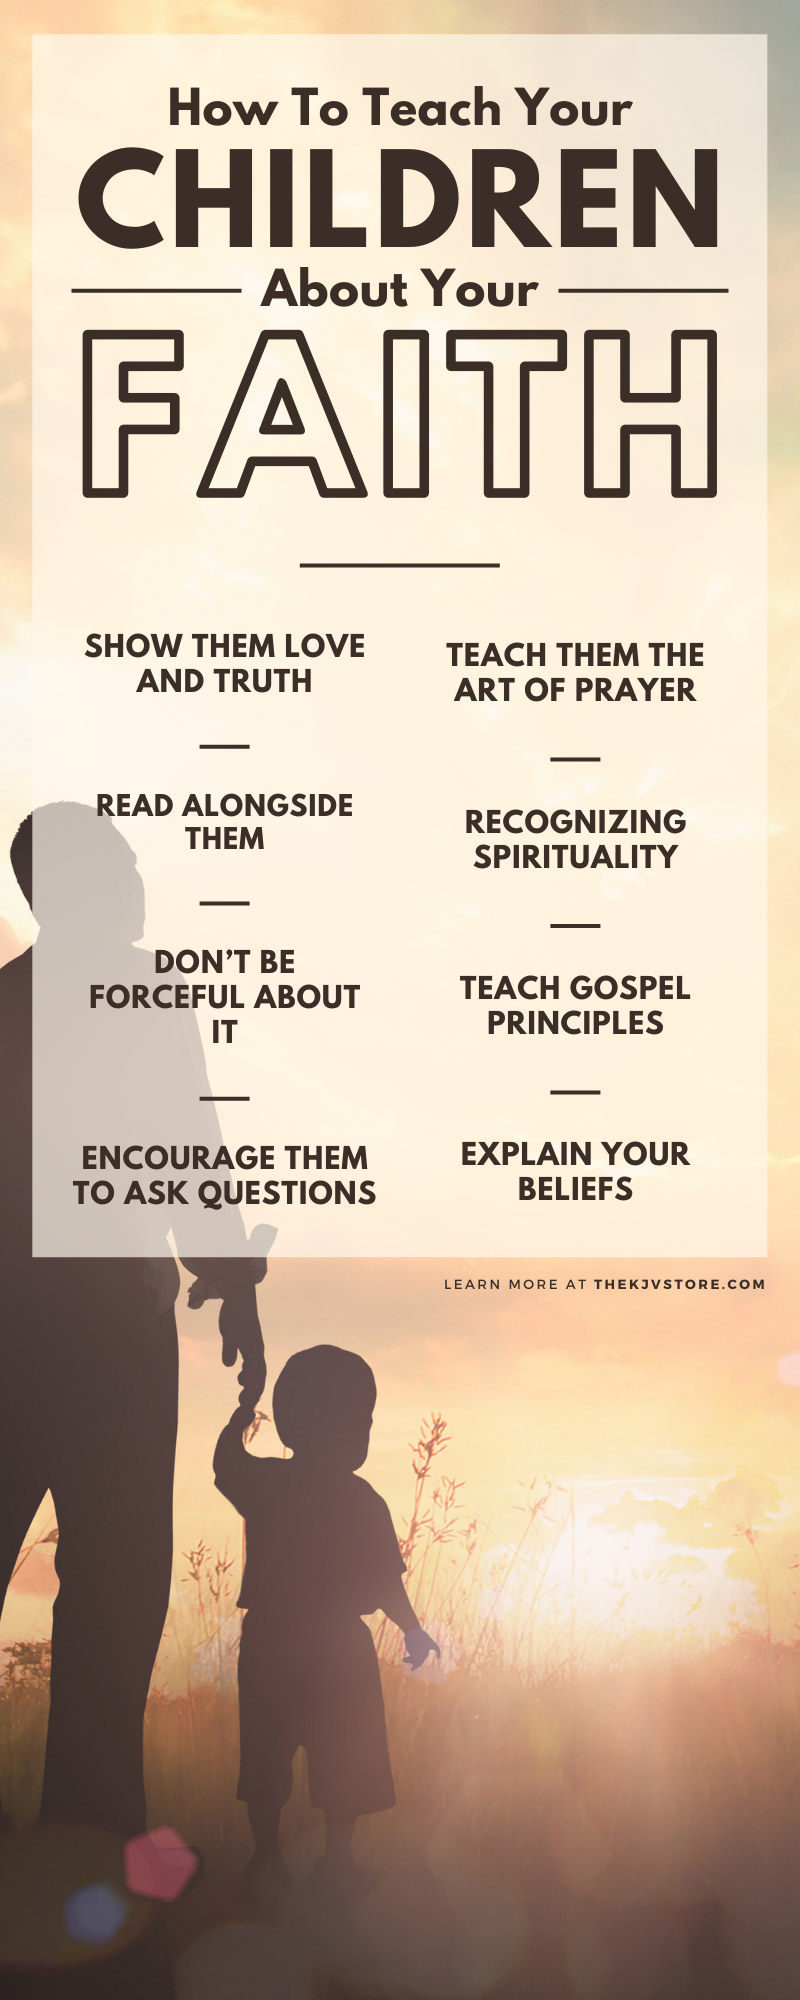 How To Teach Your Children About Your Faith